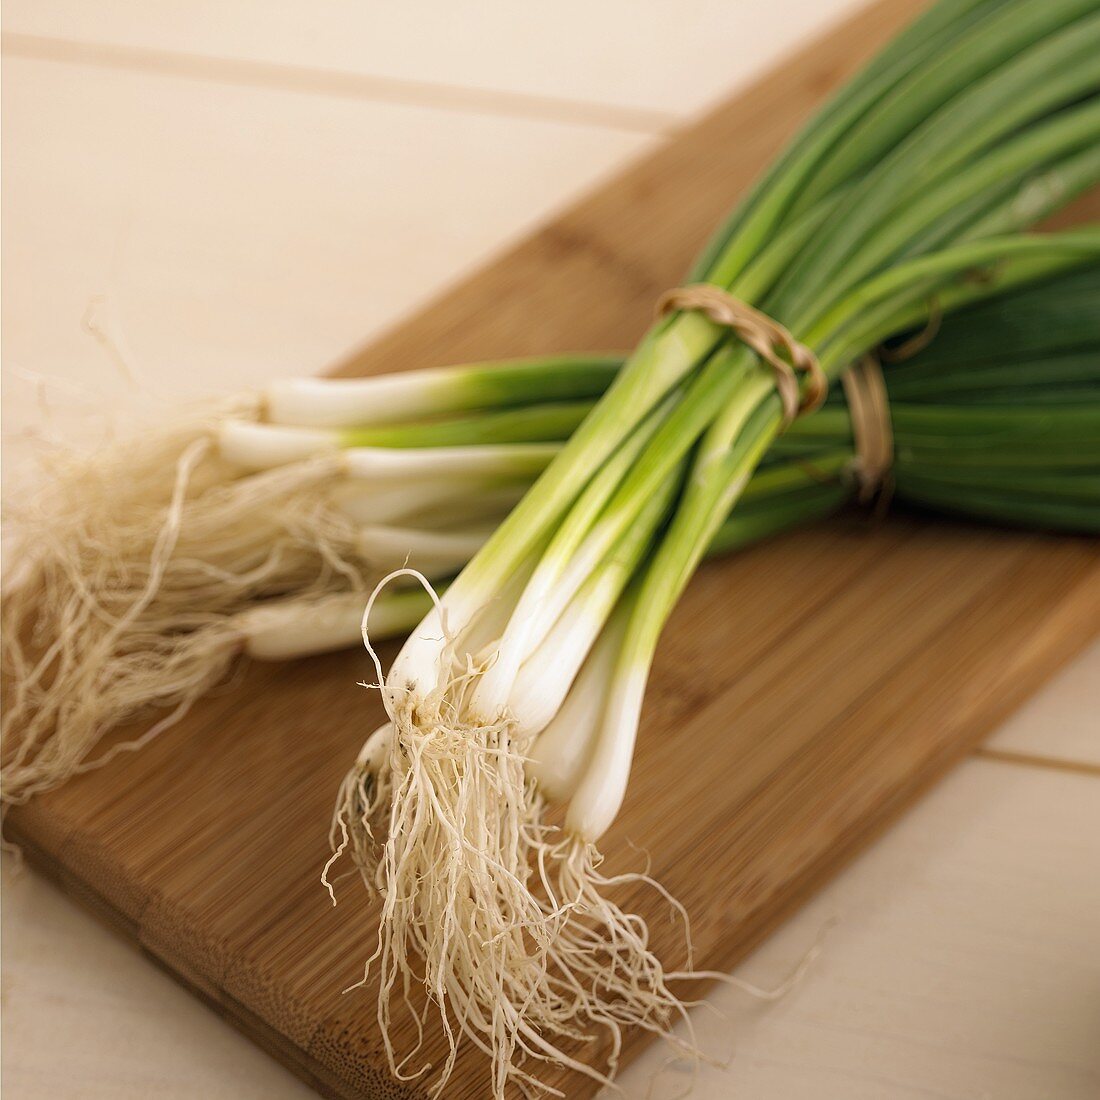 Two bunches of spring onions on chopping board